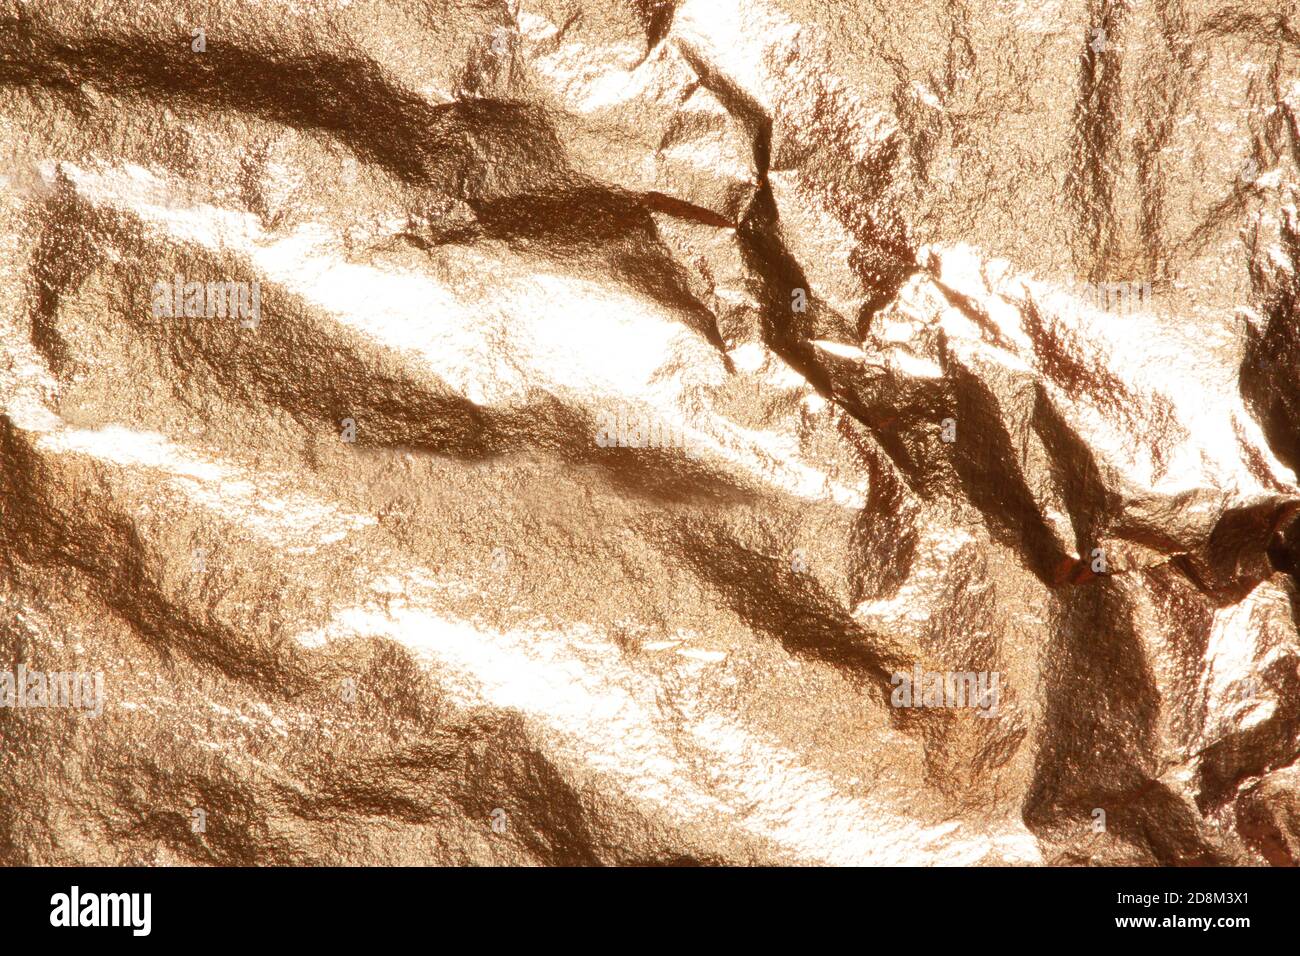 Gold bright shiny real texture of a crumpled sheet. Stock Photo